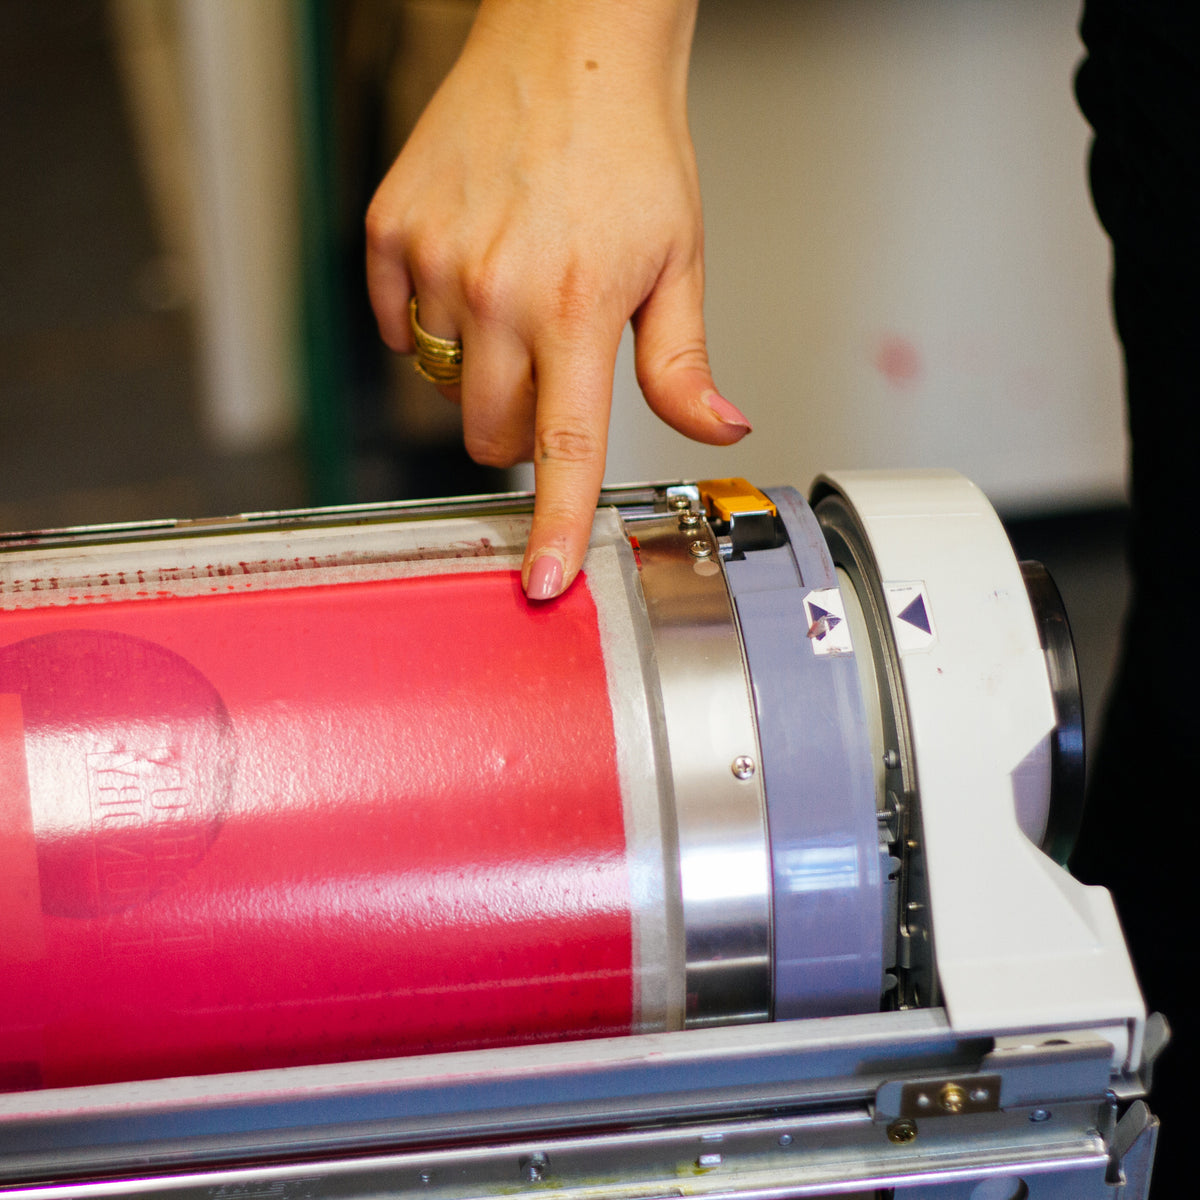 DUOTONE Photography - Riso Printing Workshop